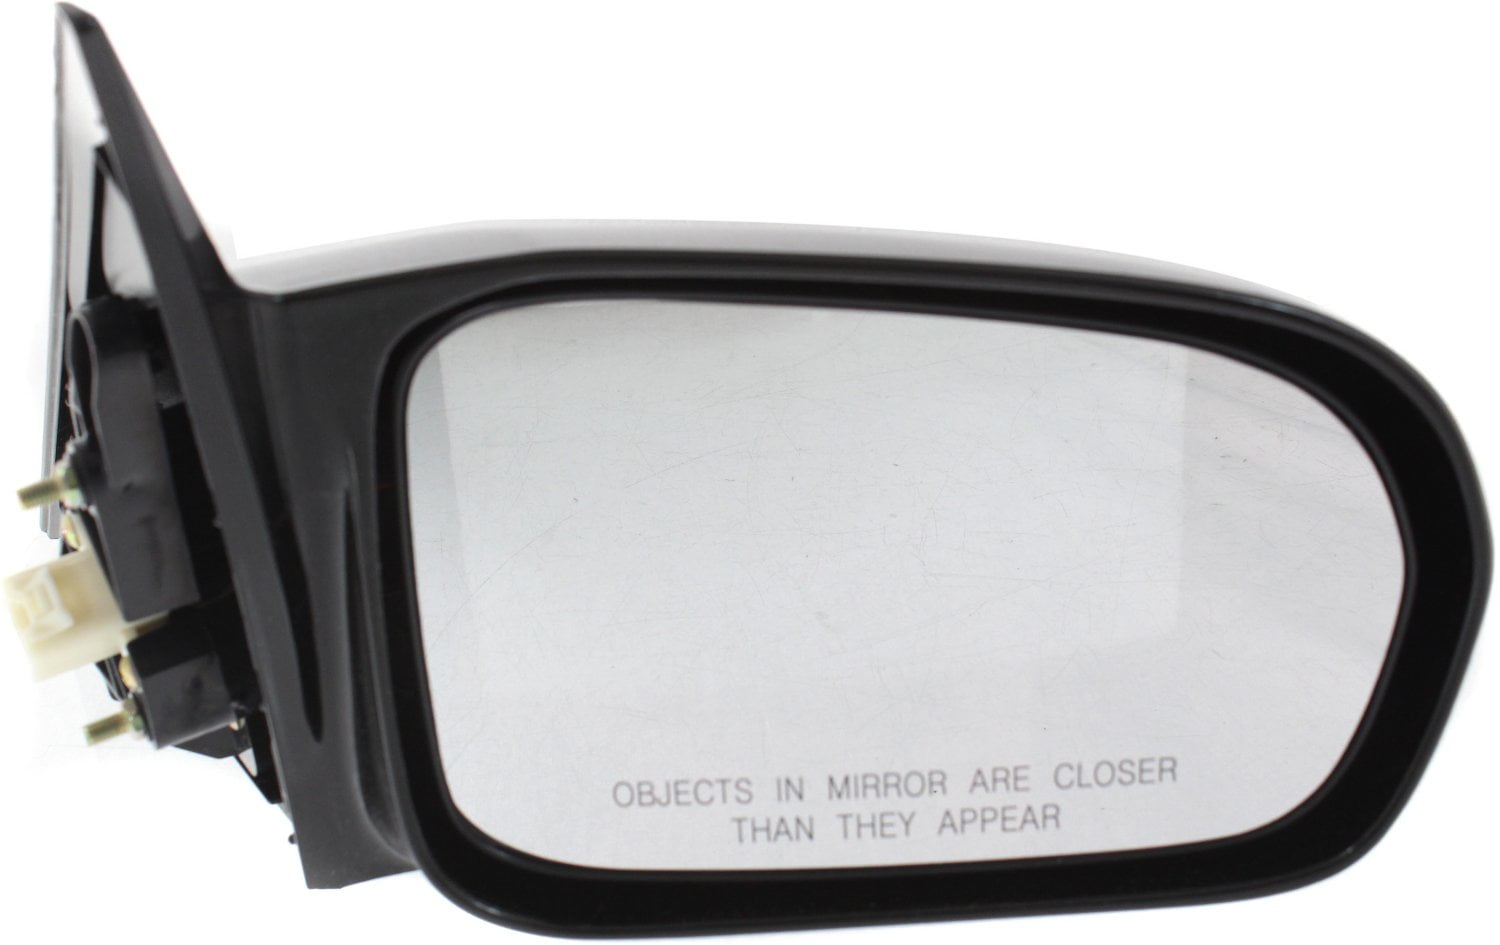 New Right Side KOOL-VUE Mirror Civic Coupe 2001 2002 03 04 2005 